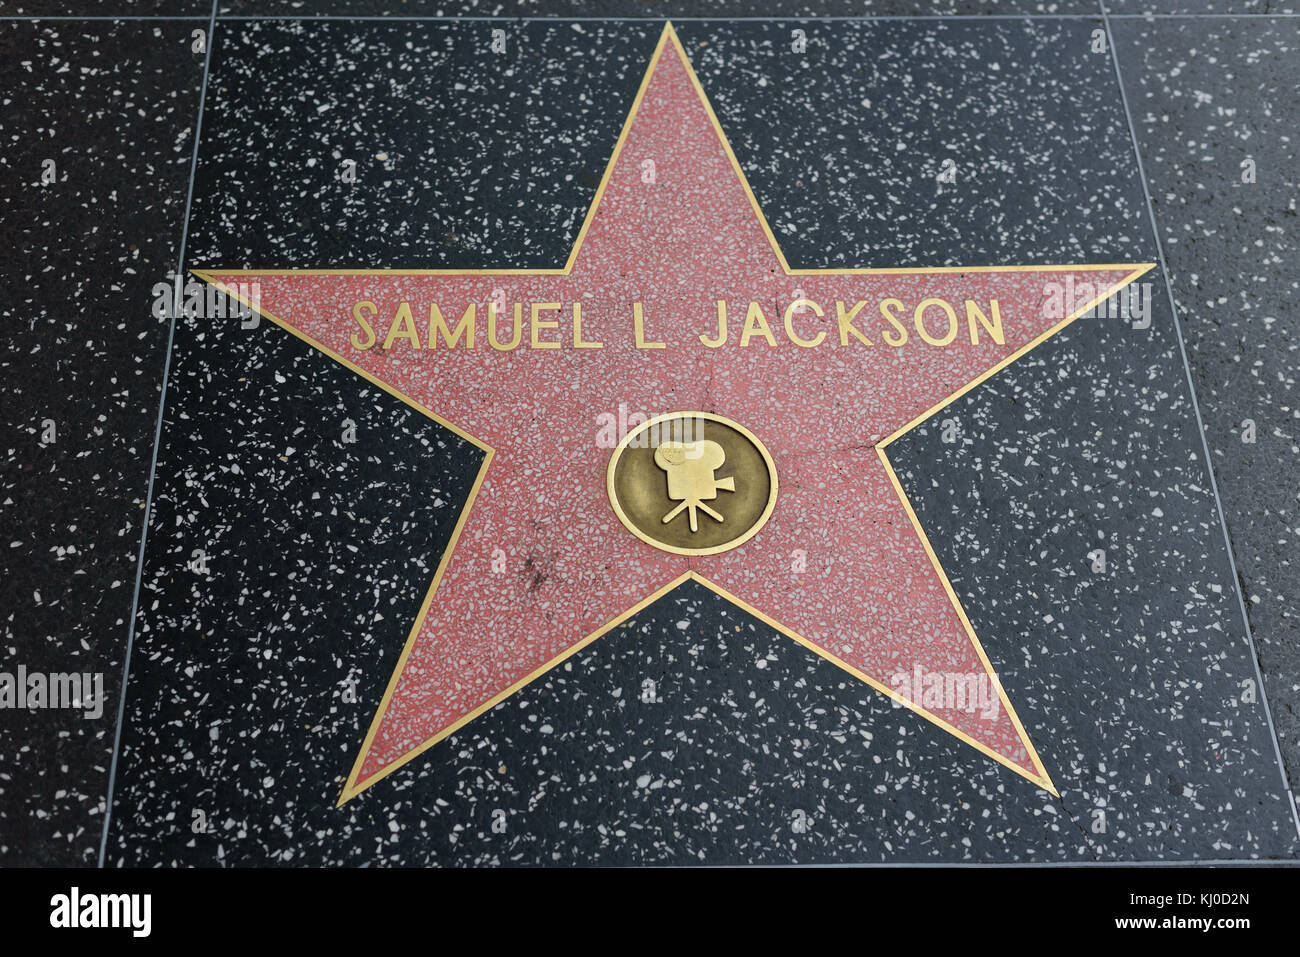 HOLLYWOOD, CA - DECEMBER 06: Samuel L Jackson star on the Hollywood Walk of Fame in Hollywood, California on Dec. 6, 2016. Stock Photo